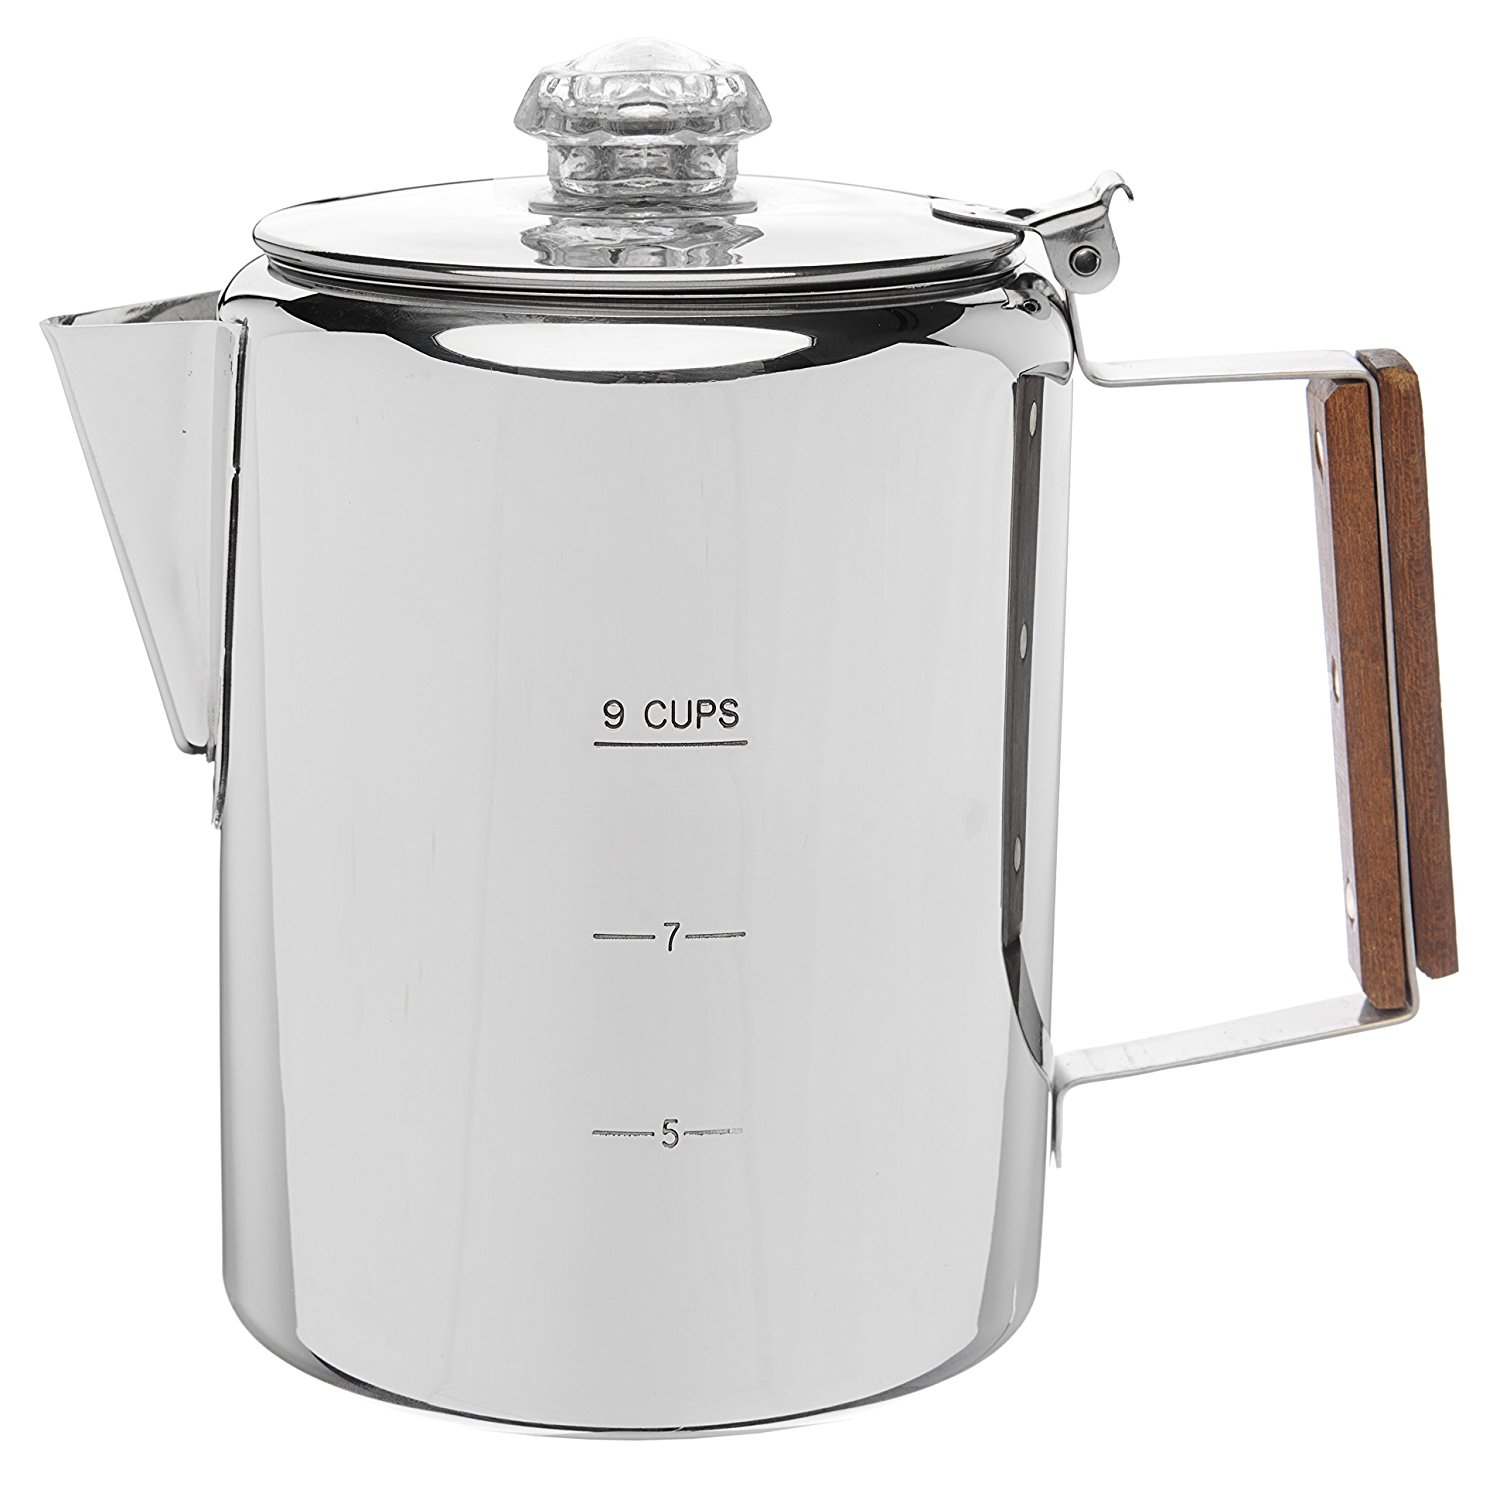 Excellent Quality Stainless Steel Stovetop Coffee Percolator Pot Kettle